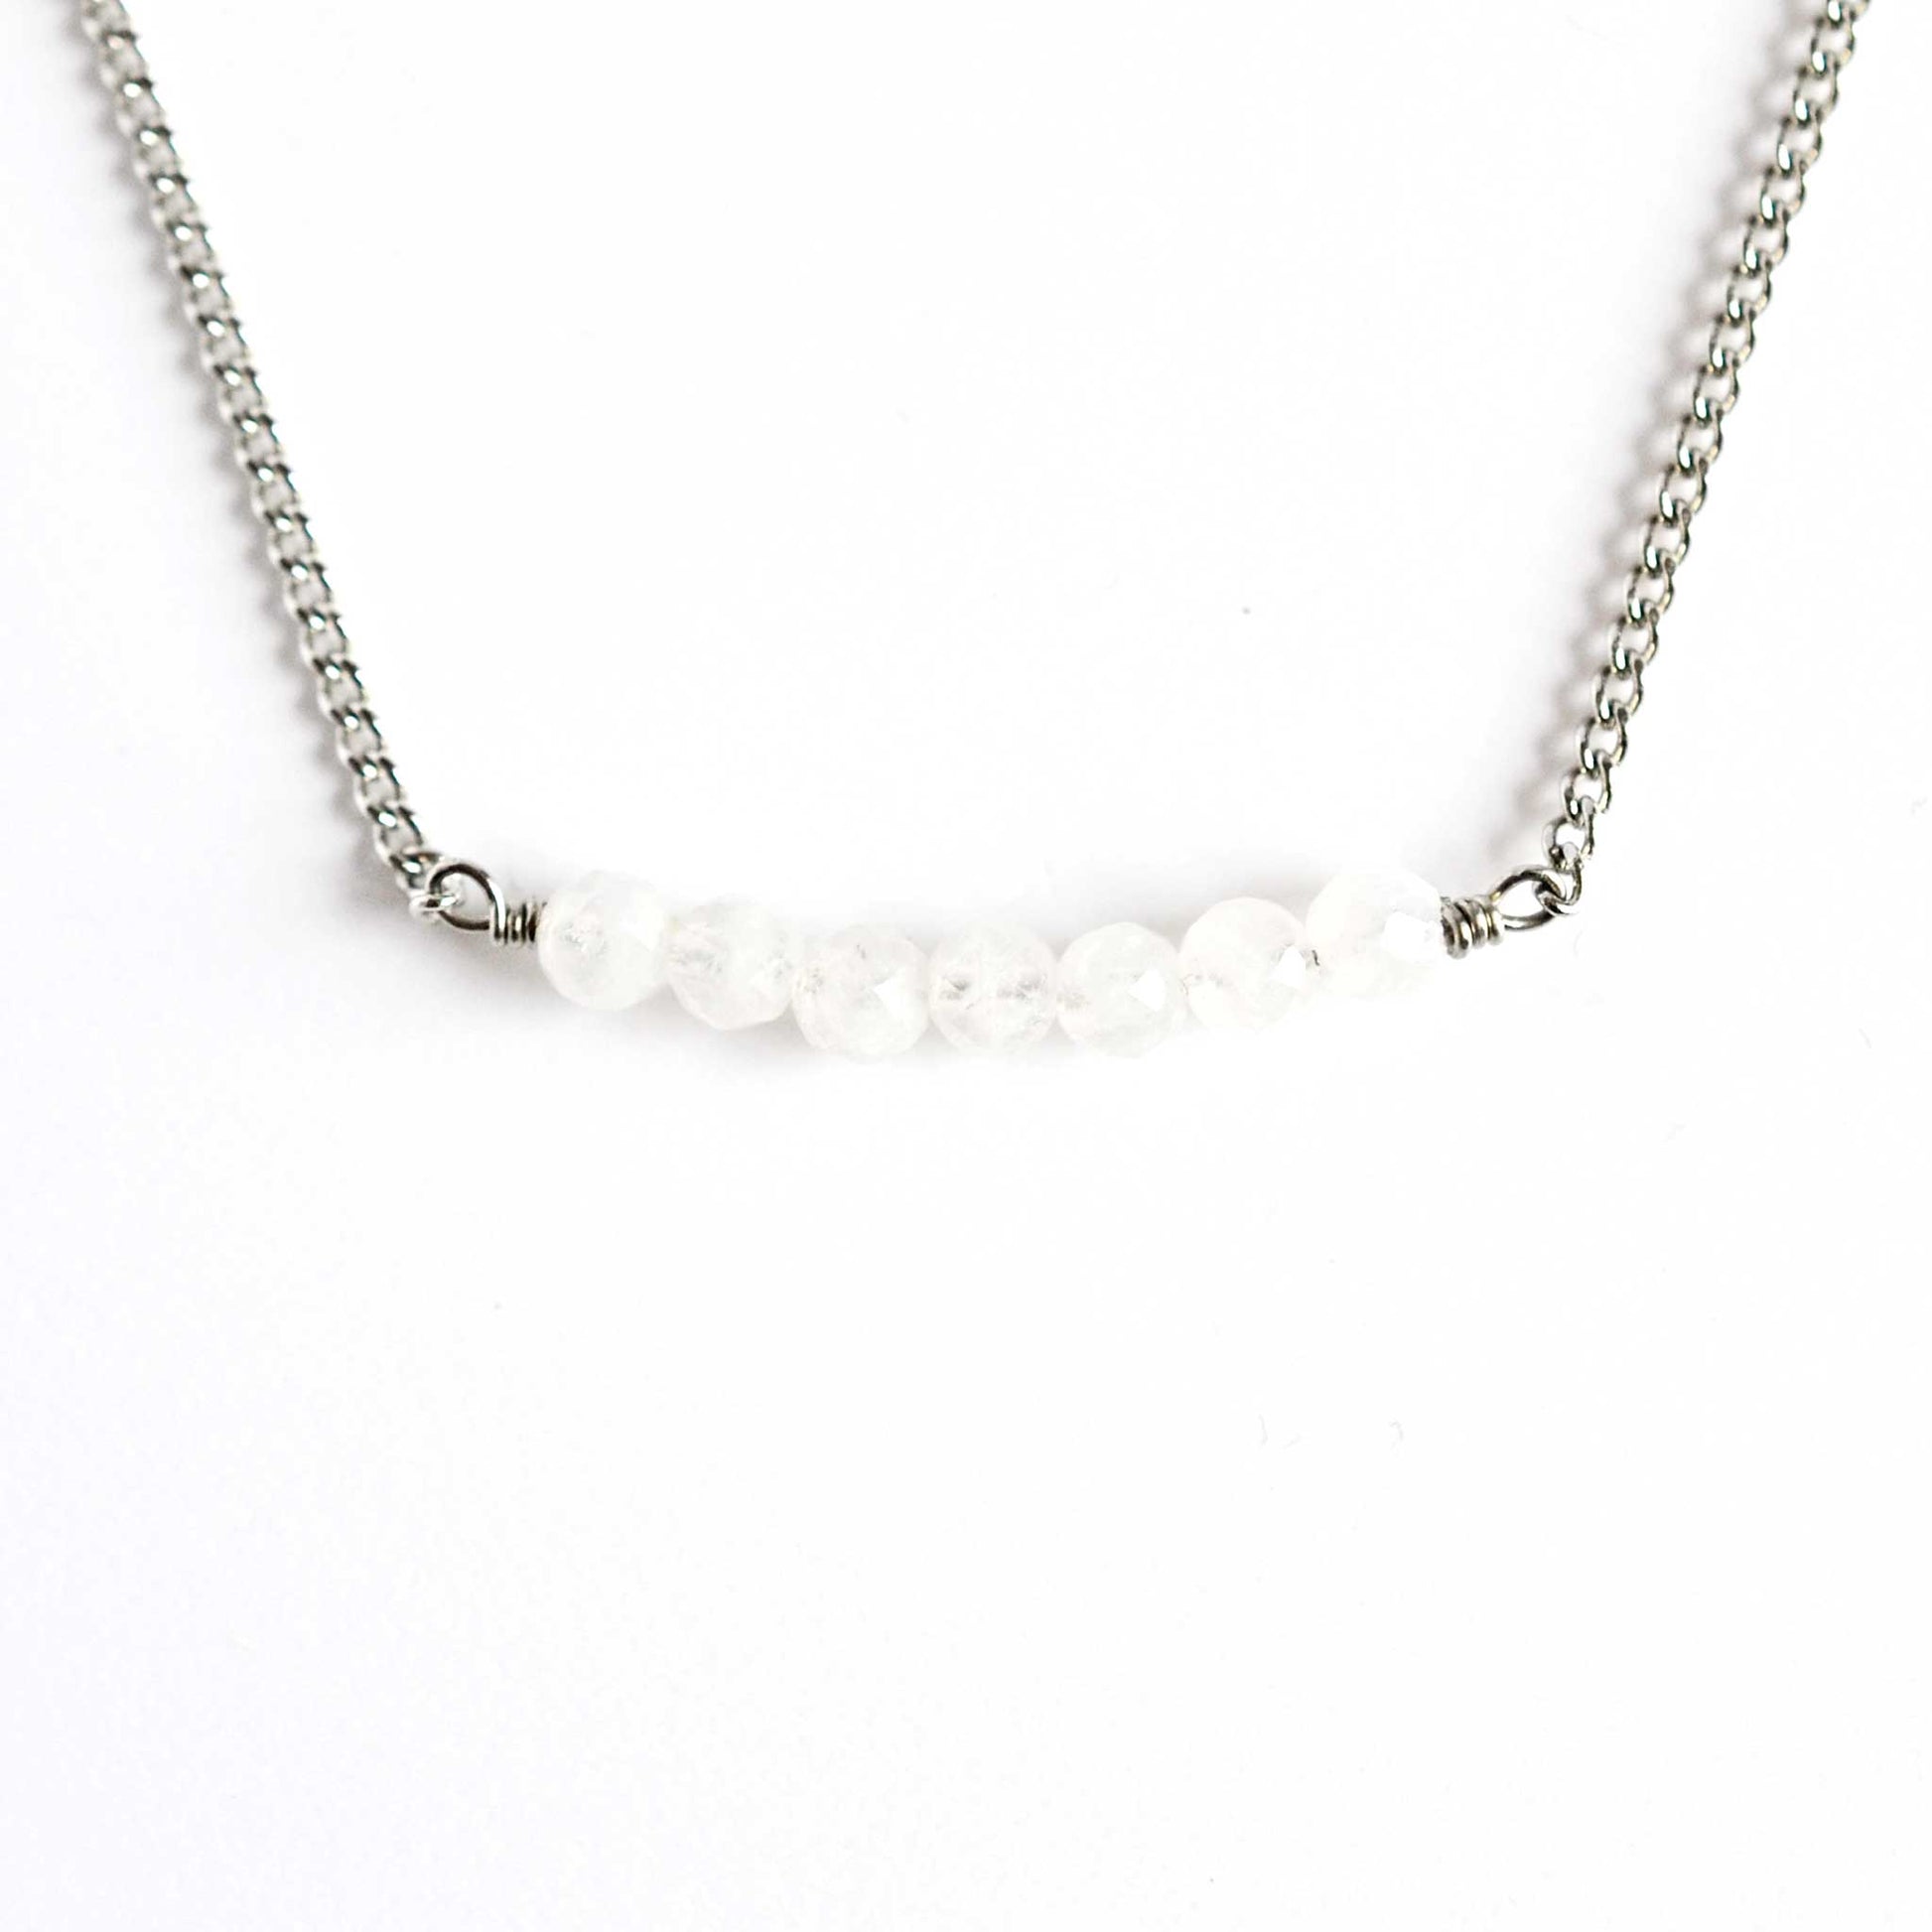 Rainbow Moonstone necklace with stainless steel chain on white background